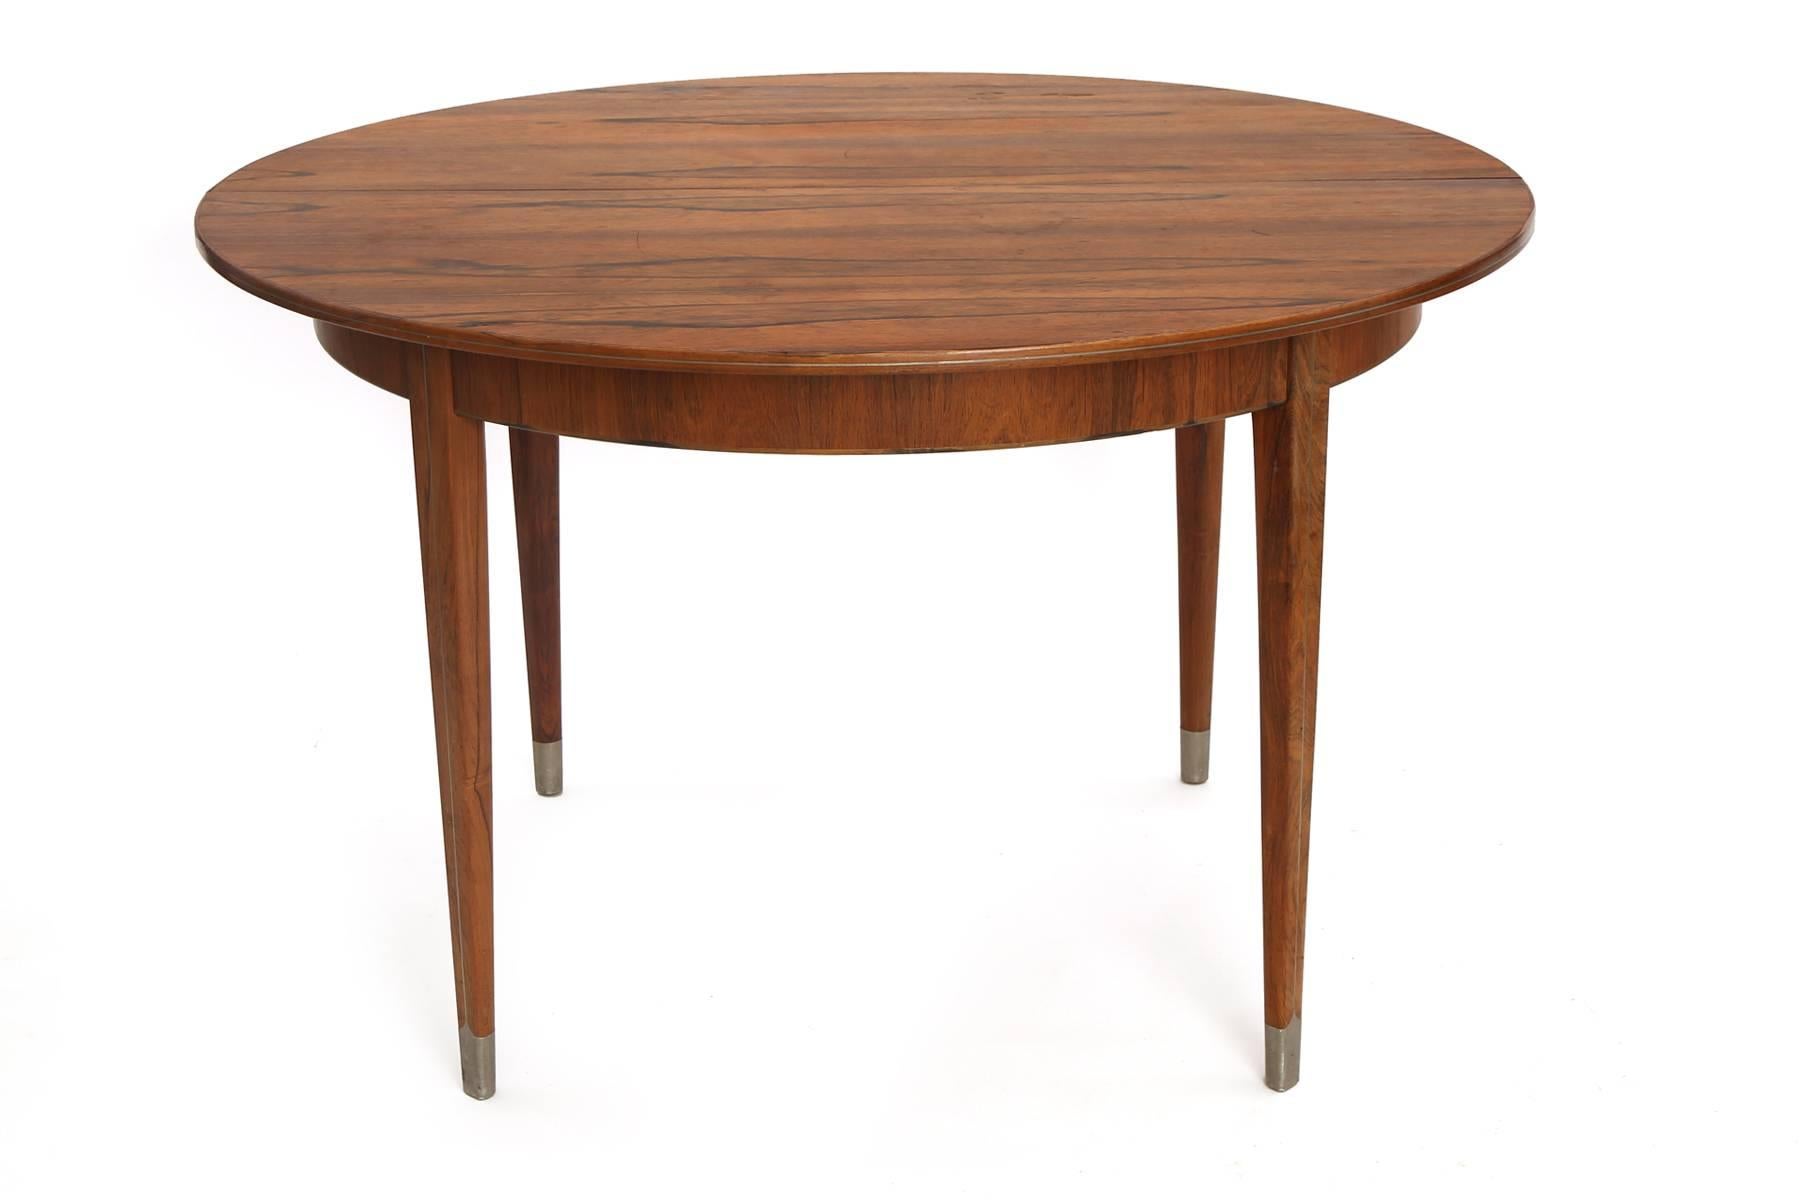 Rare rosewood and pewter dining table by Georg Kofoed, circa late 1930s. This all original example has a beautifully grained rosewood top and extends from 49